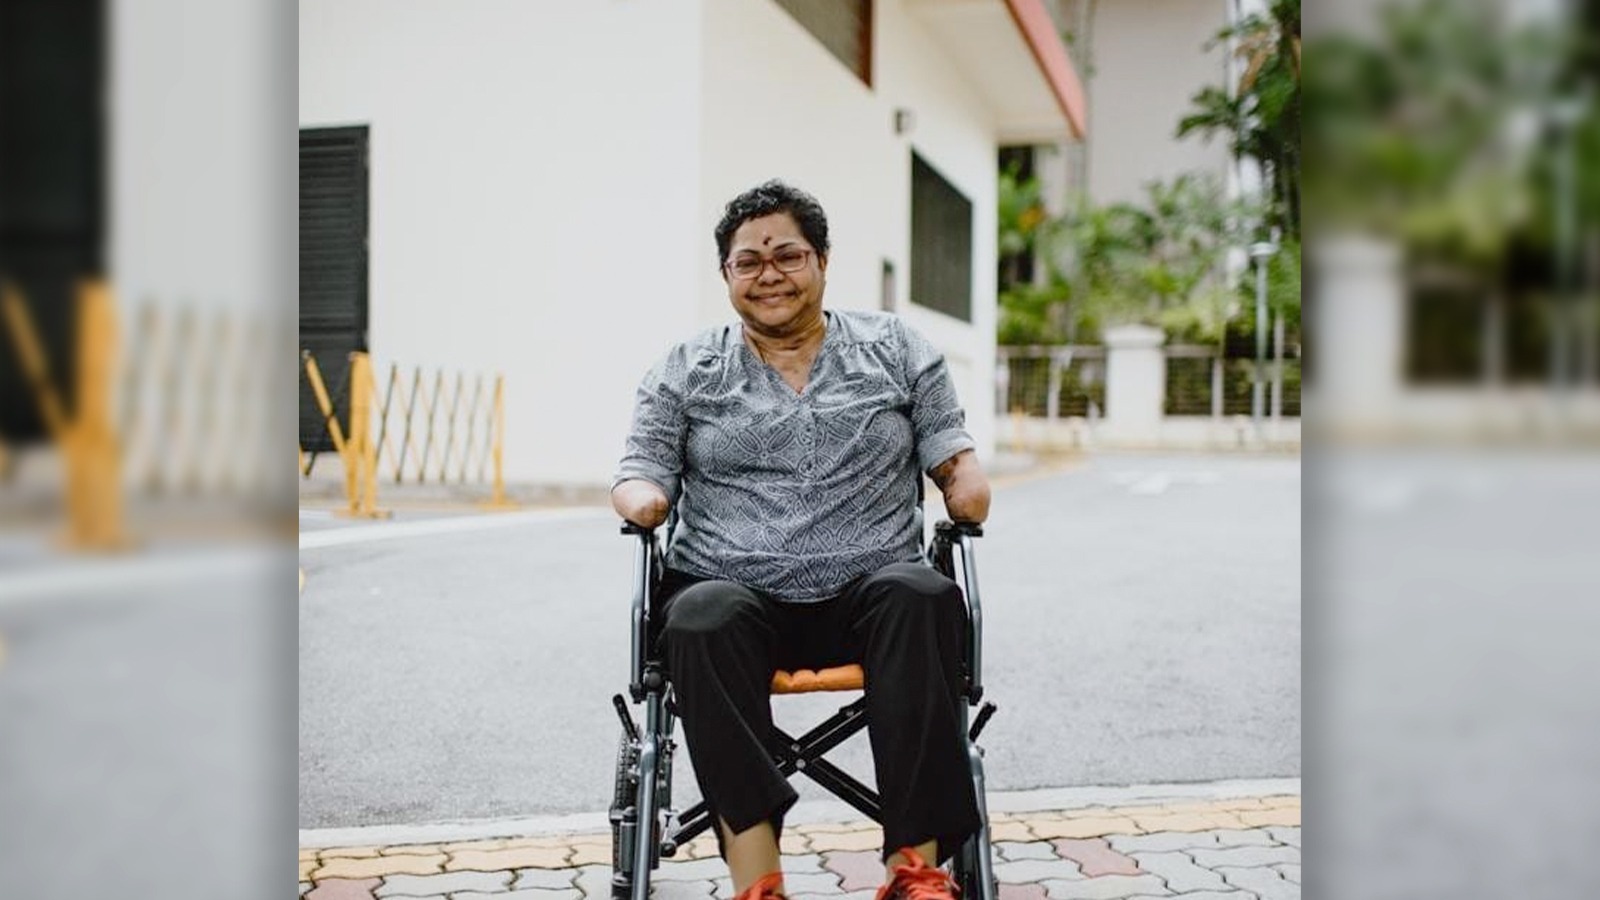 An infection caused this nurse to lose her limbs. But she refuses to let her disability weigh her down